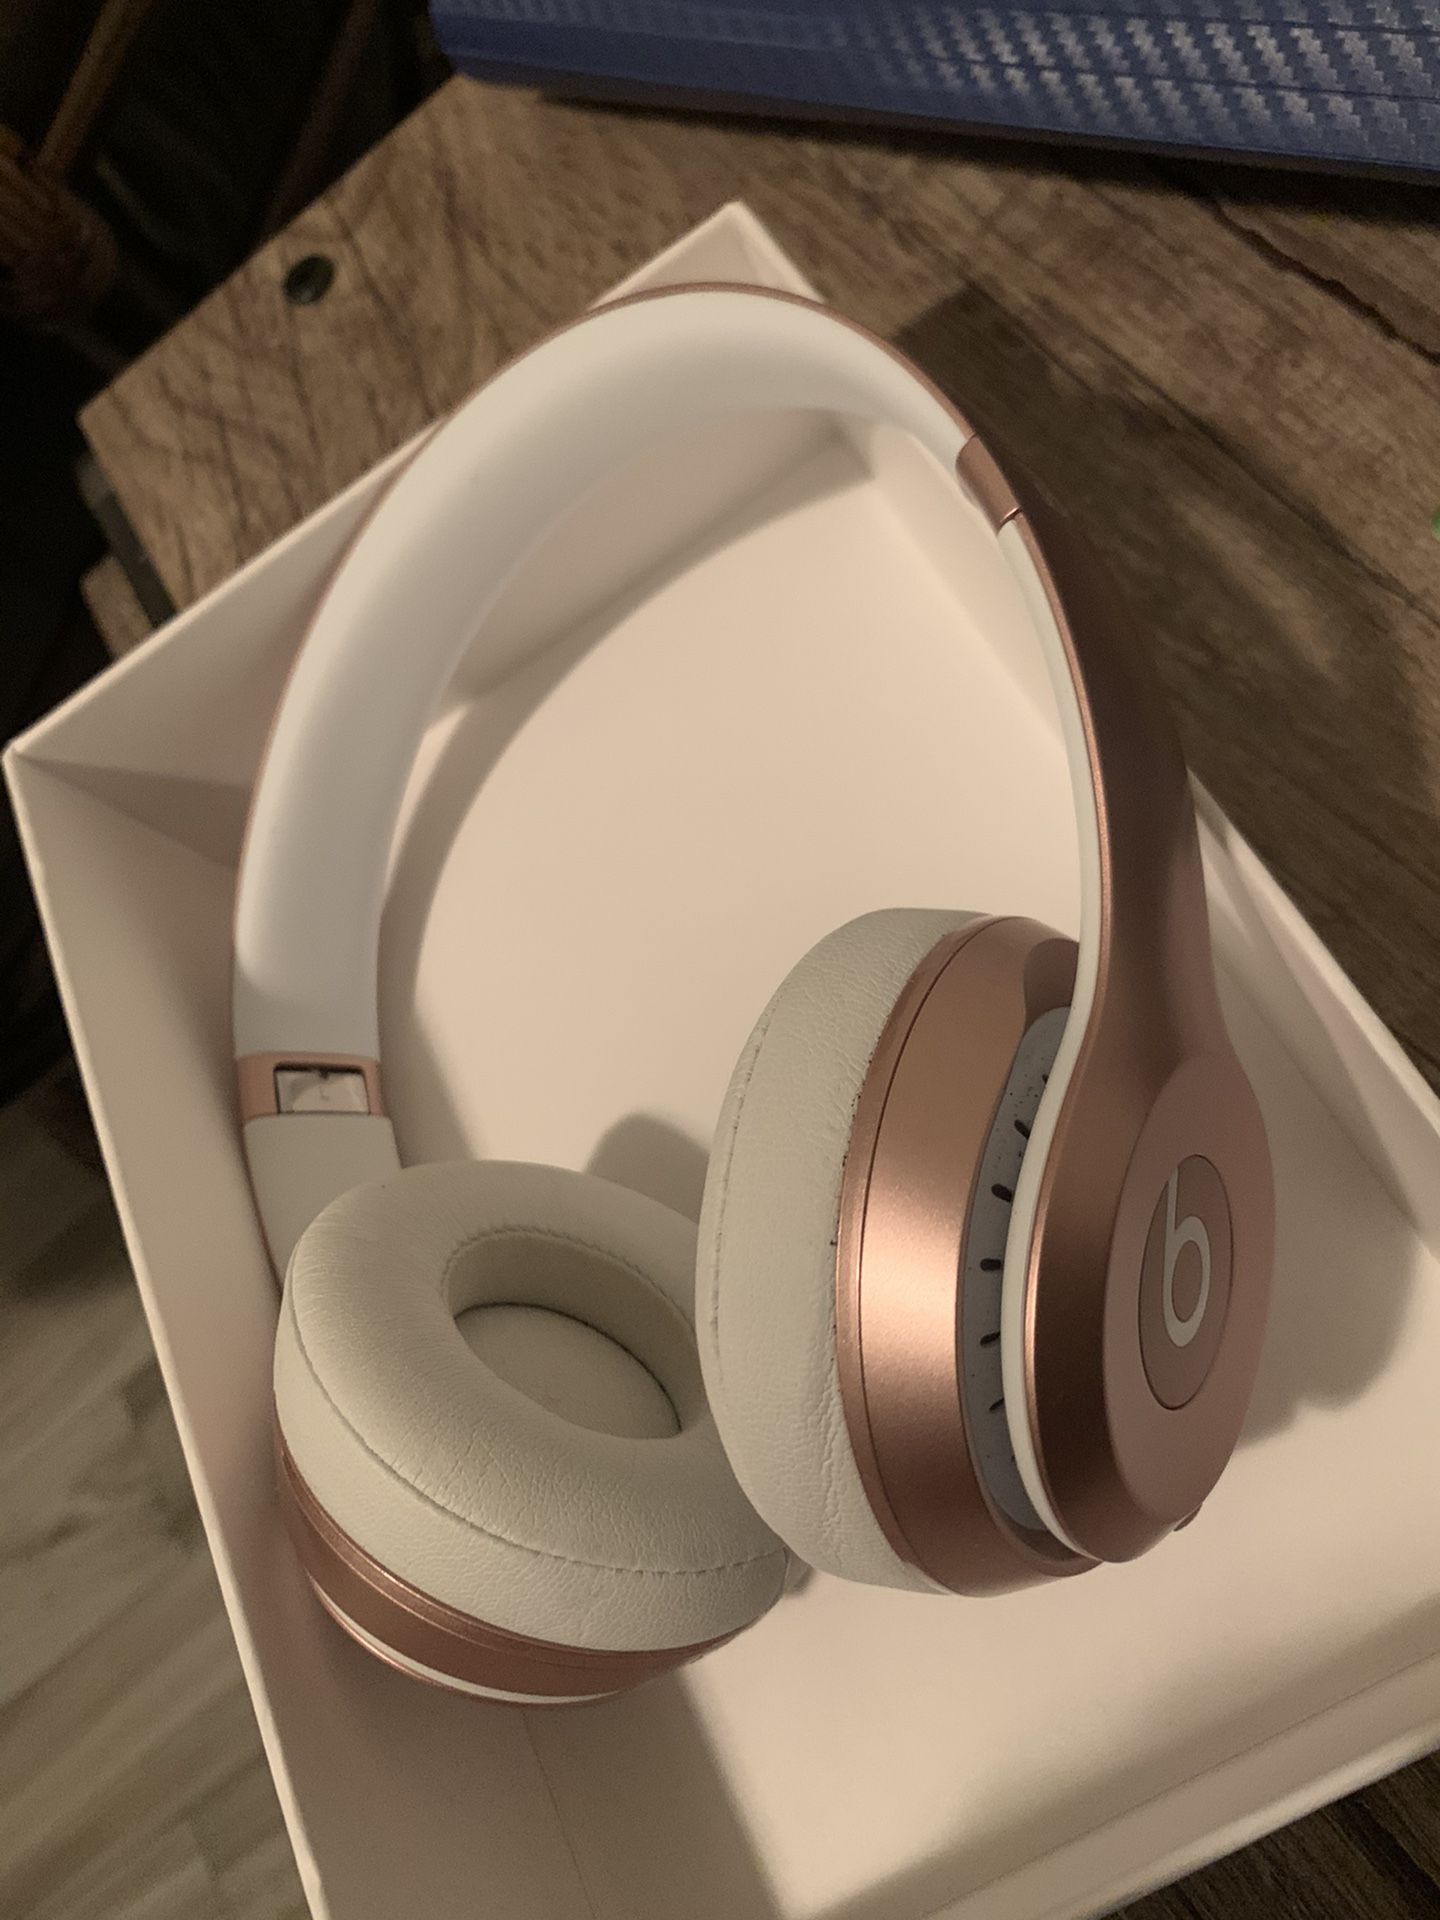 Beats solo 2 wireless headphones rose gold special edition